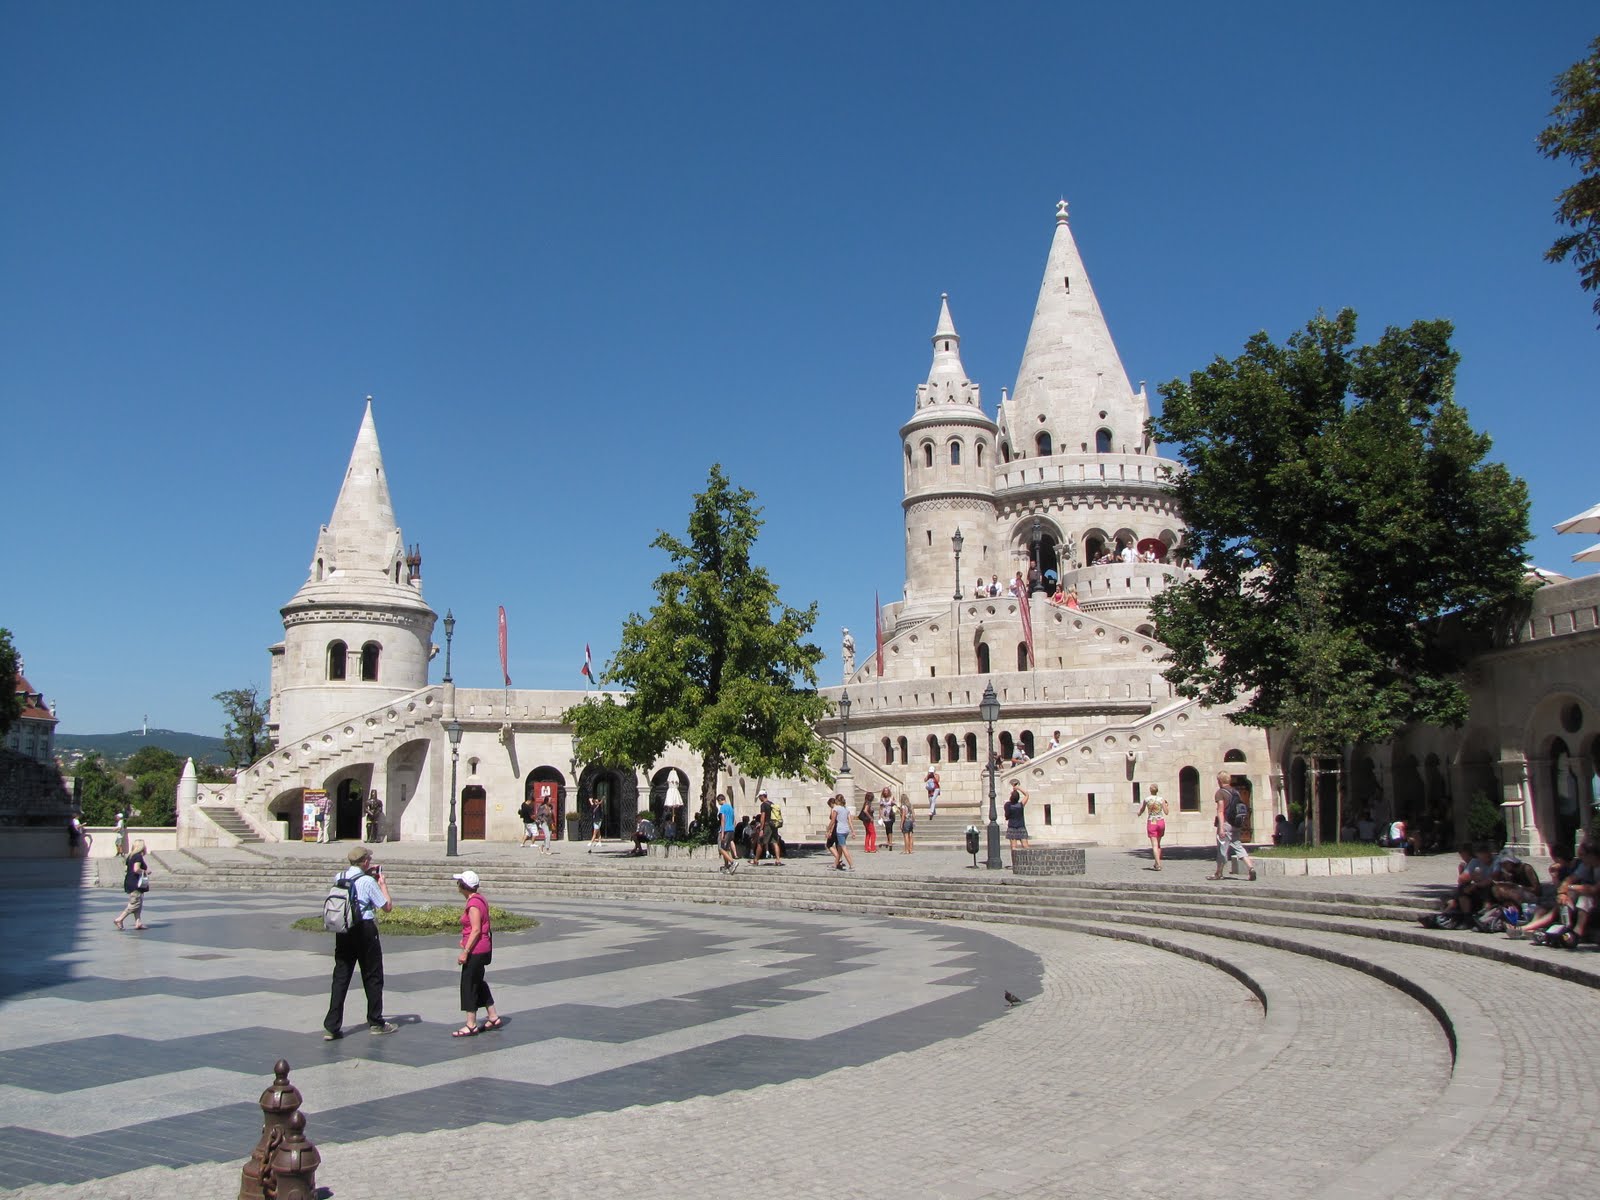 The Szentháromság Square with the Fisherman's Bastion in the background